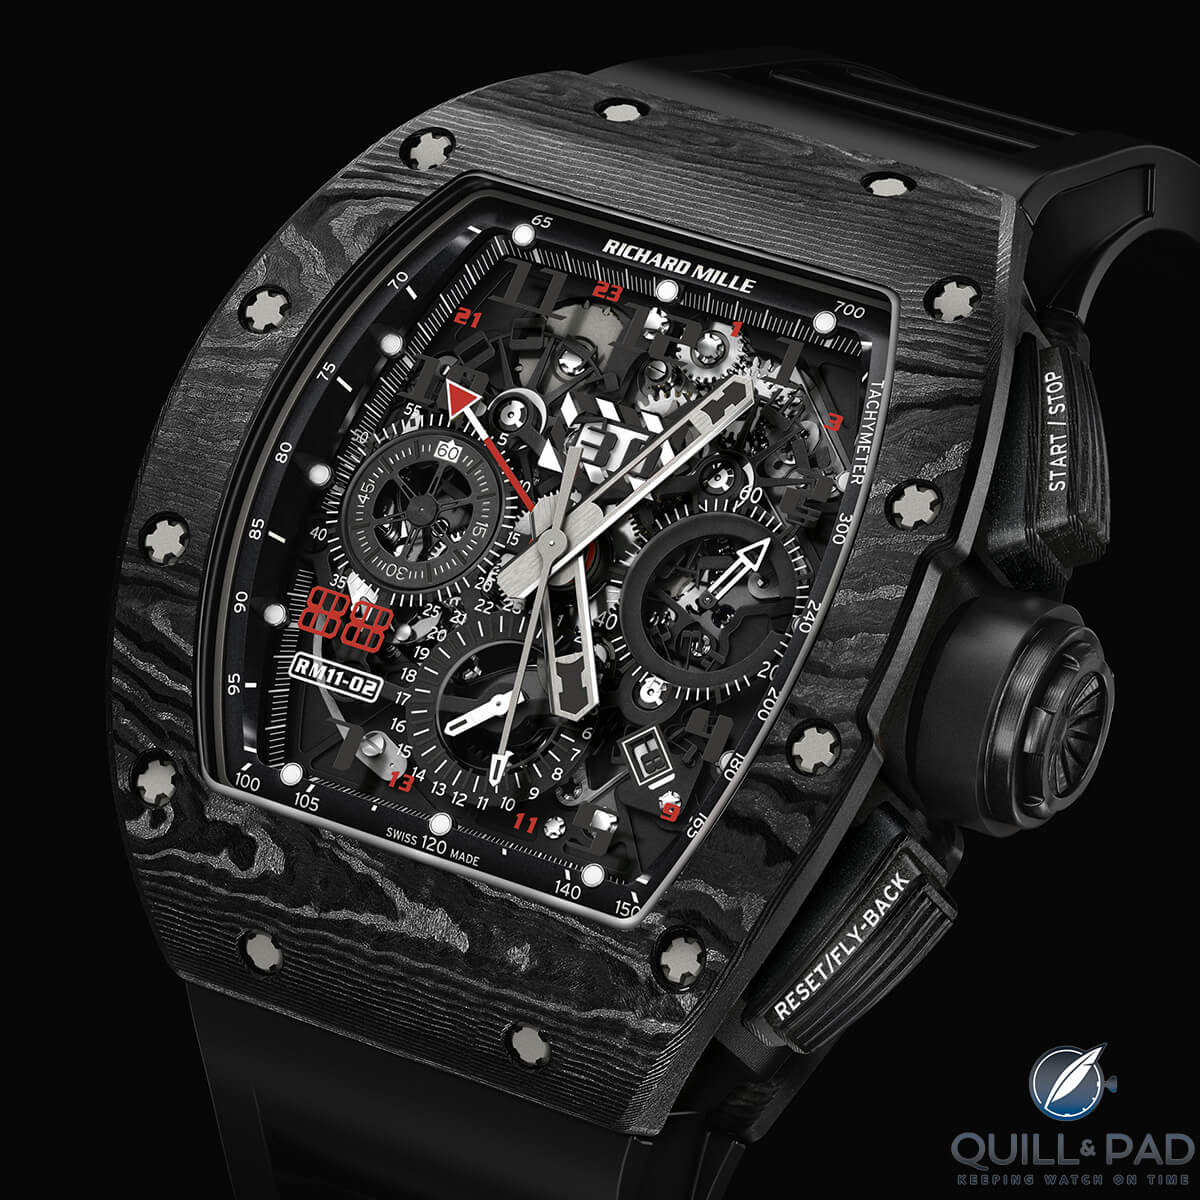 Richard Mille RM 11-02 Automatic Flyback Chronograph Dual Time Zone Jet Black